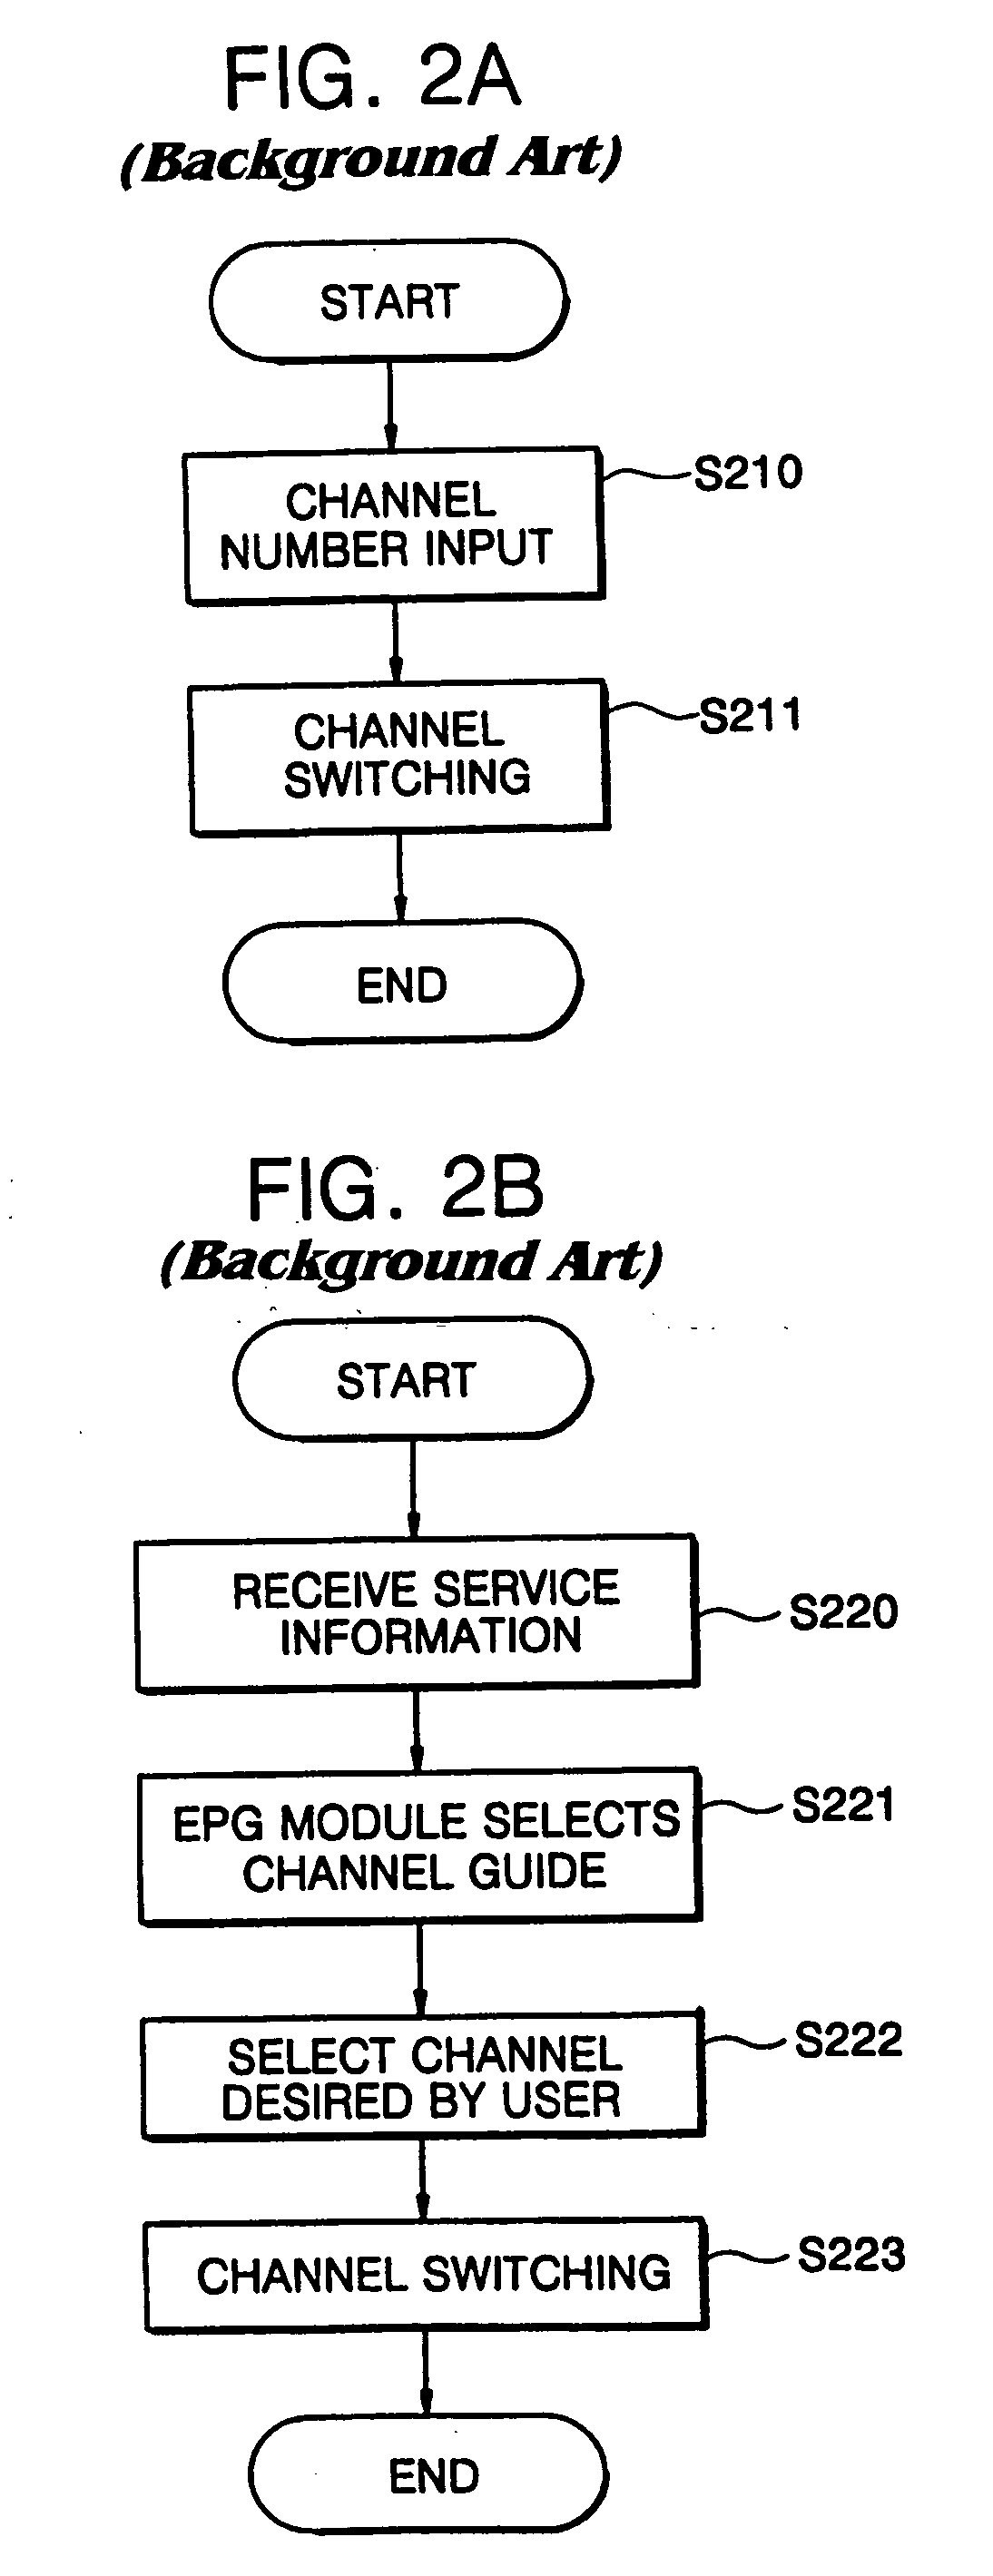 Apparatus and method for switching channels in a digital broadcasting system